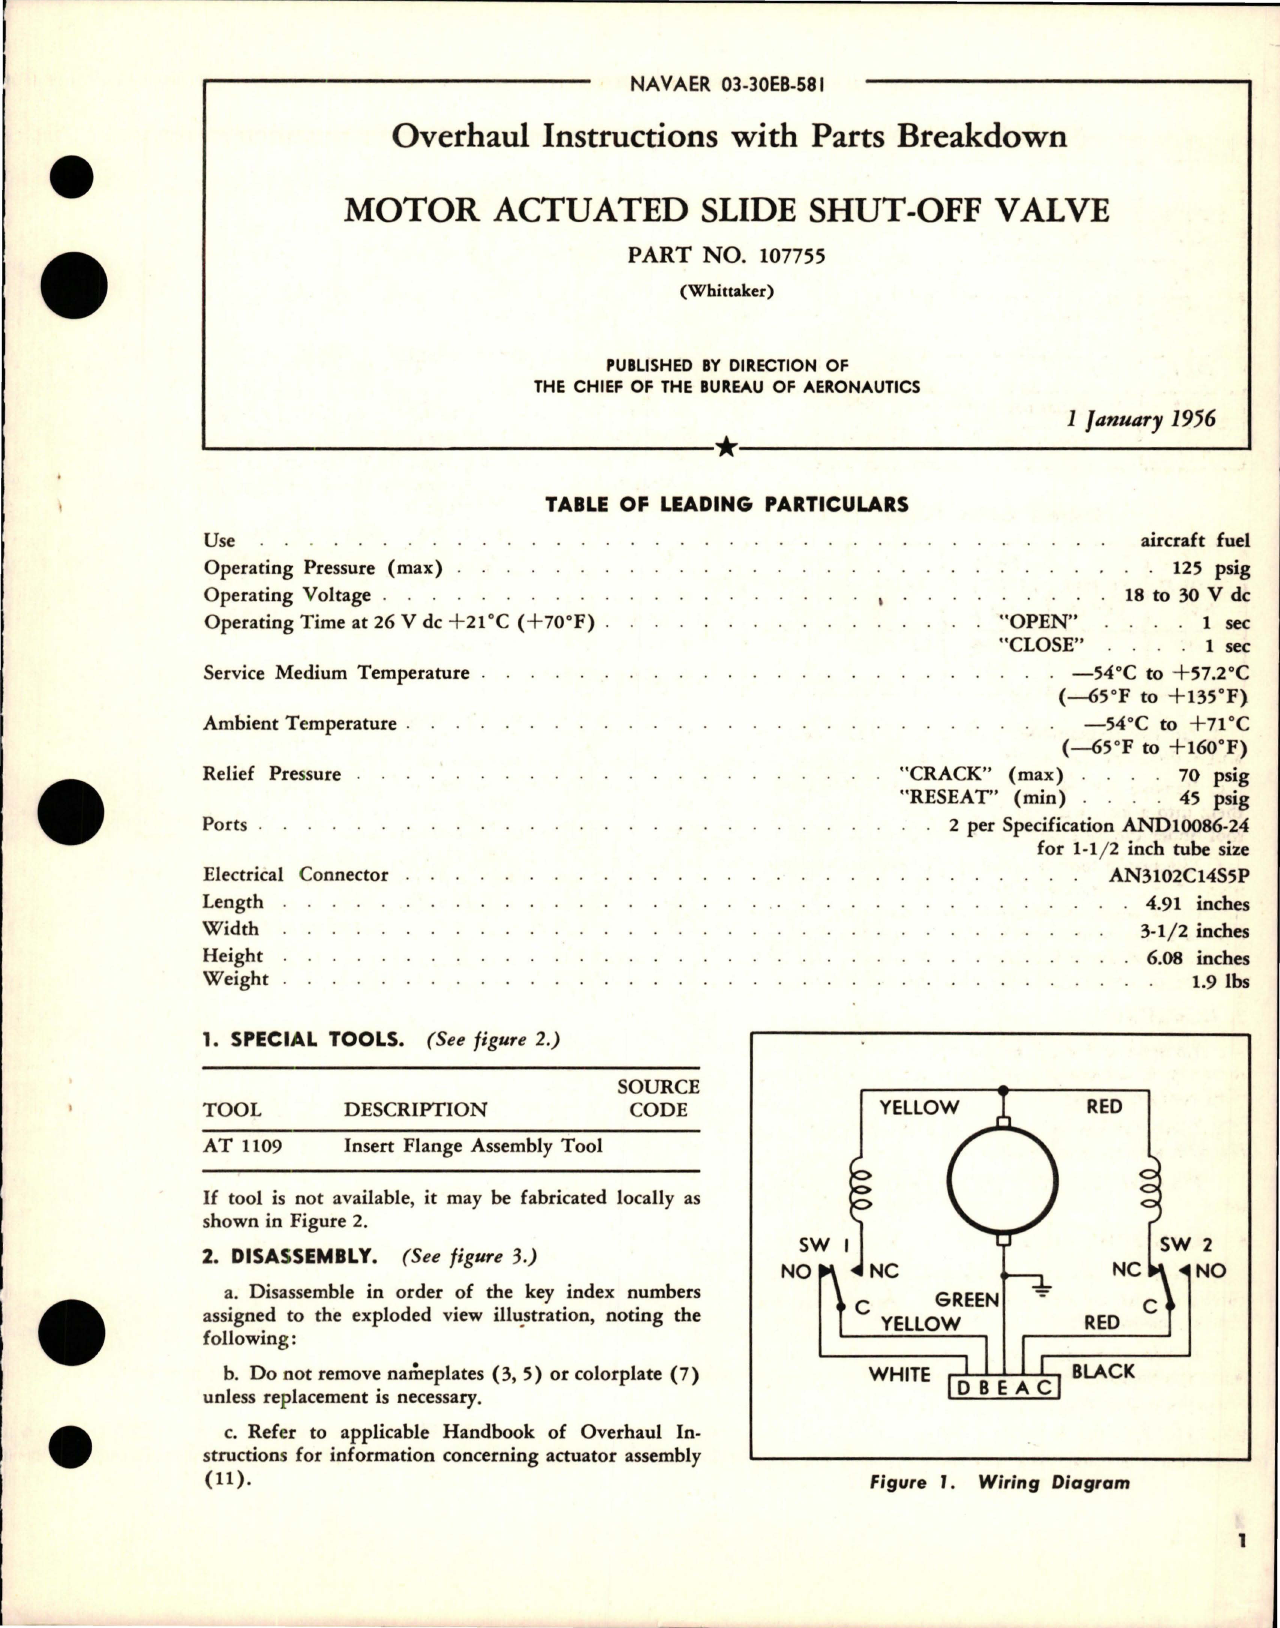 Sample page 1 from AirCorps Library document: Overhaul Instructions with Parts for Motor Actuated Slide Shut Off Valve - Part 107755